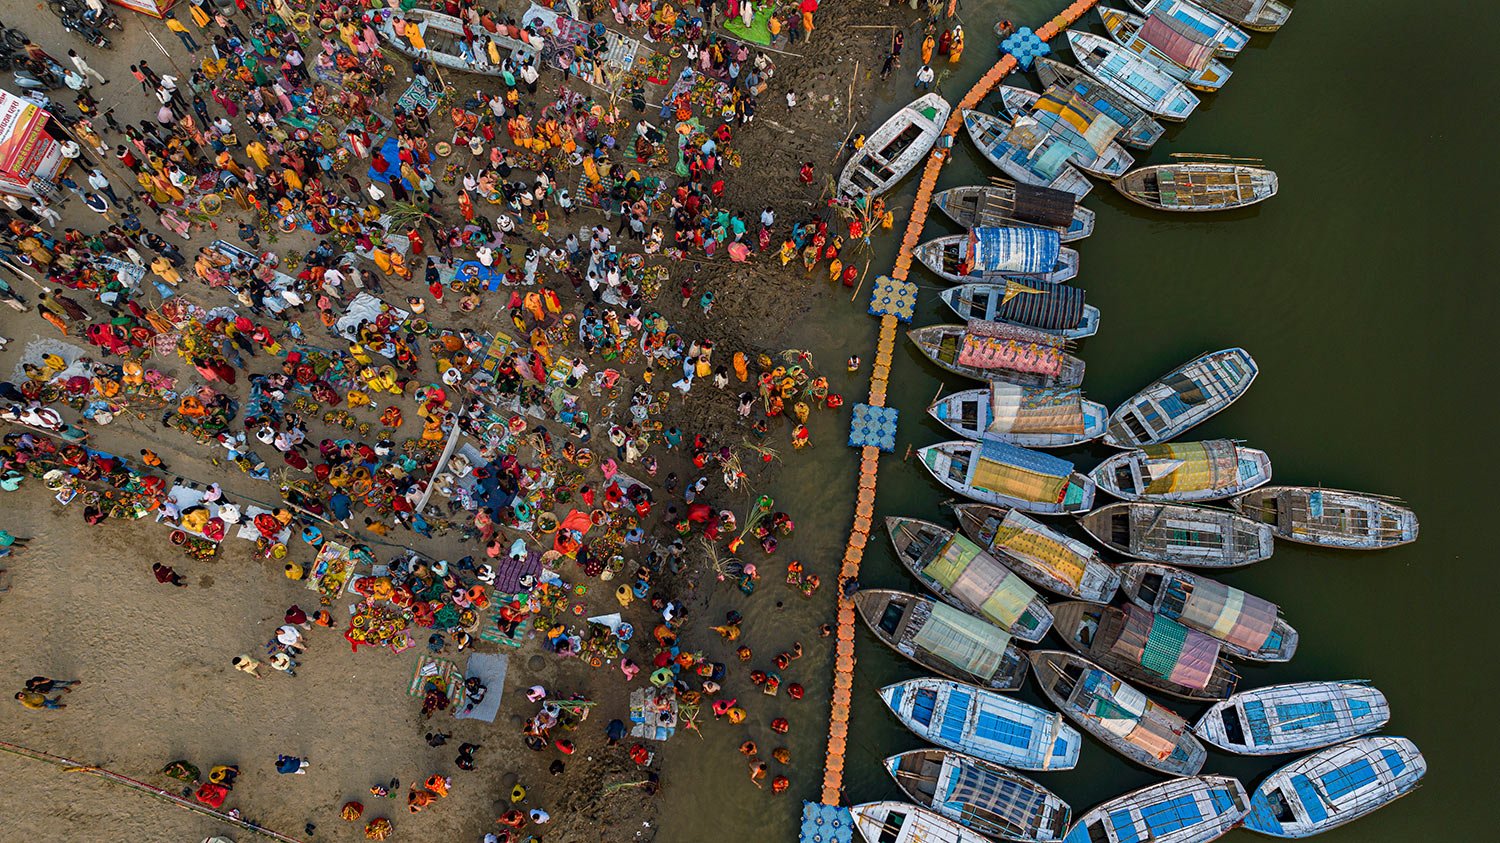  Hindu devotees gather to perform rituals to the Sun god during Chhath Puja festival at Sangam, the confluence of rivers the Ganges and the Yamuna in Prayagraj, in the northern state of Uttar Pradesh, India, Sunday, Oct. 30, 2022. (AP Photo/Rajesh Ku